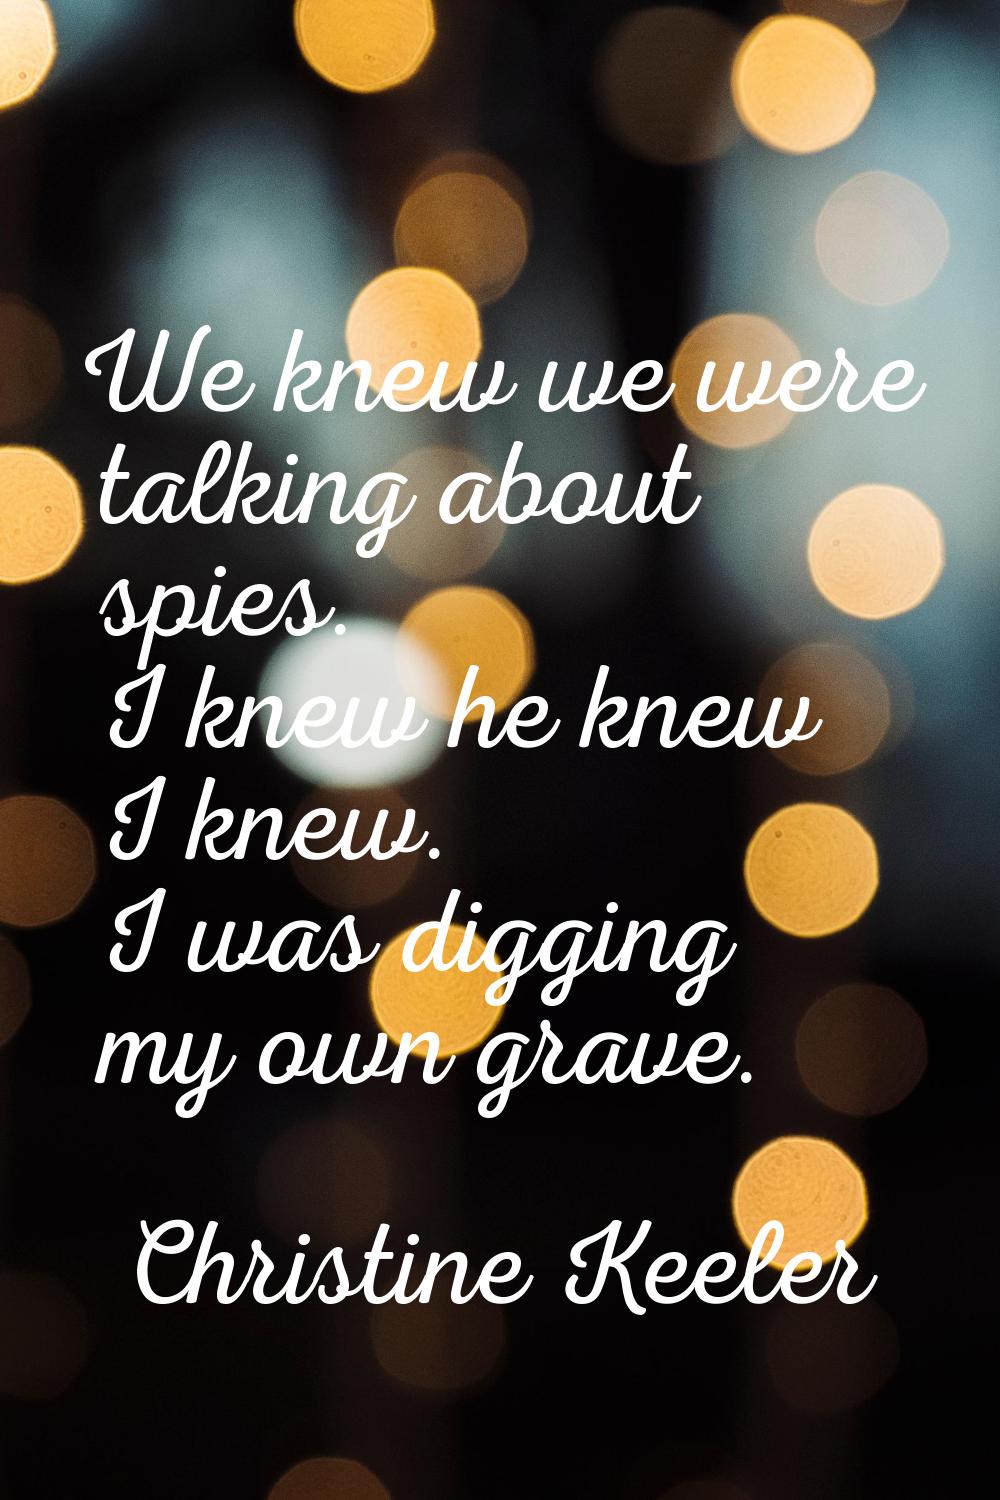 We knew we were talking about spies. I knew he knew I knew. I was digging my own grave.